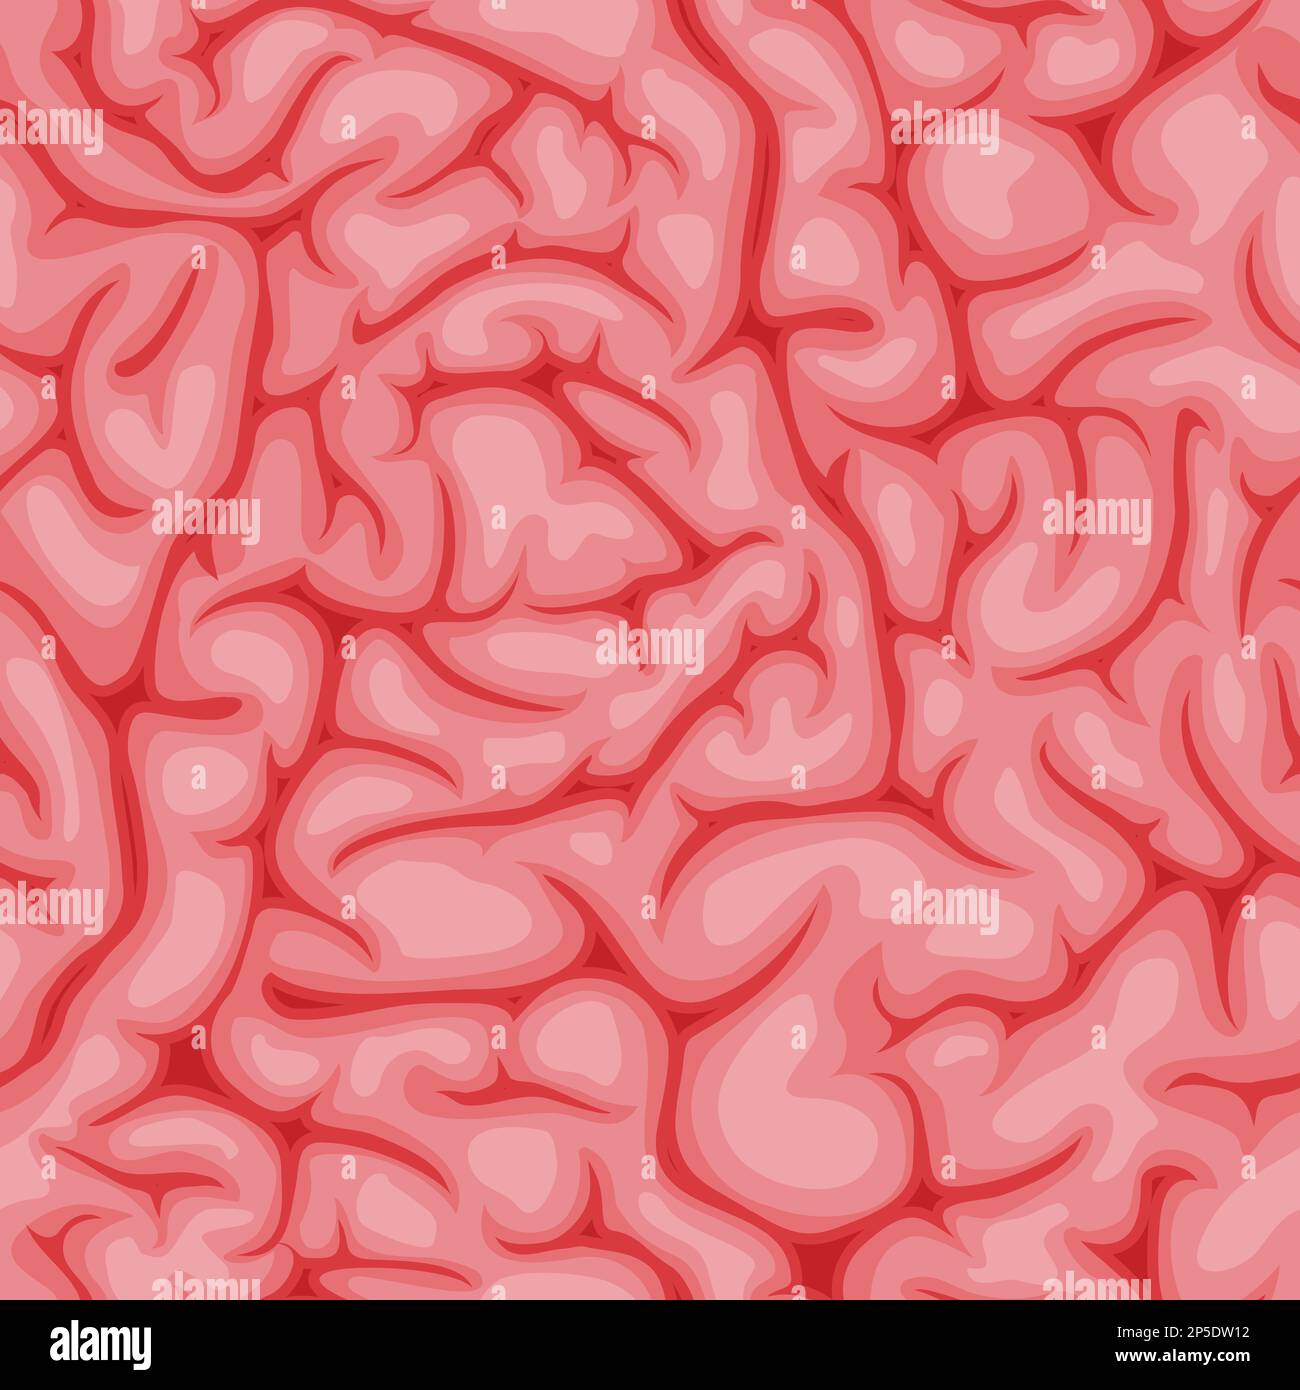 https://c8.alamy.com/comp/2P5DW12/brain-seamless-pattern-with-pink-tissue-texture-vector-background-of-halloween-zombie-brain-or-human-mind-anatomy-ornament-with-pink-folds-human-hea-2P5DW12.jpg